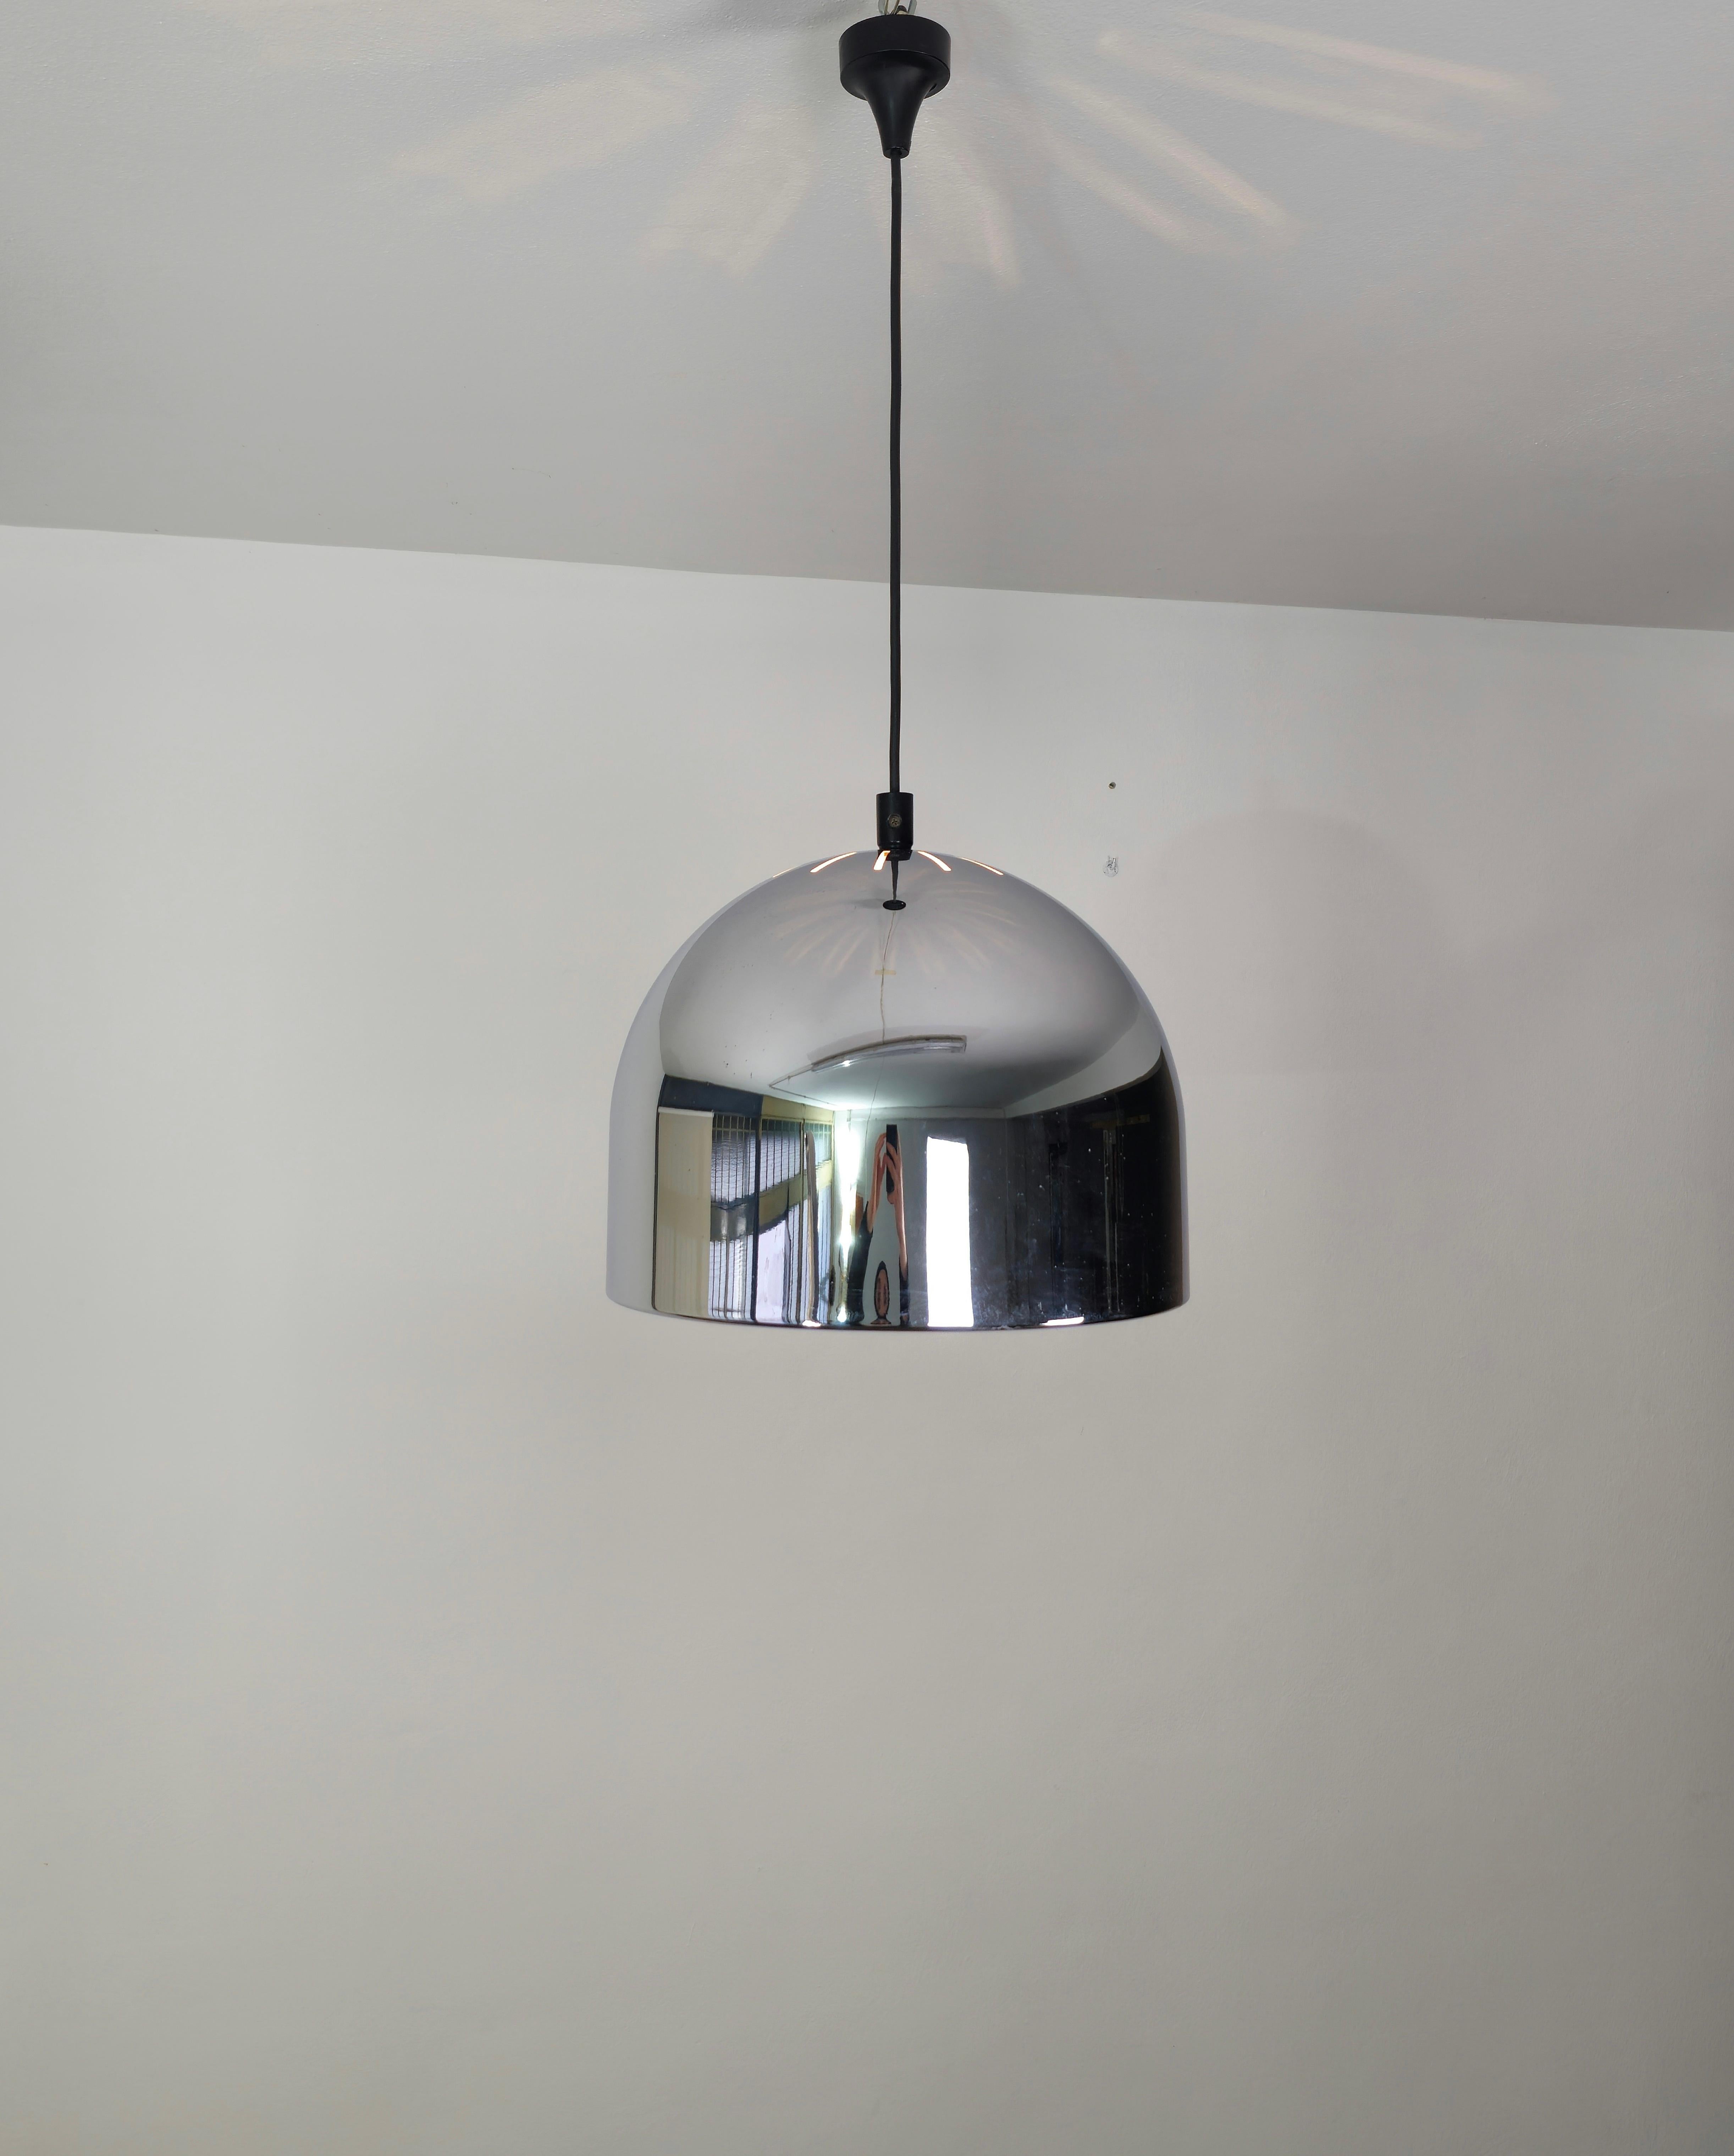 Chandelier Pendant Chromed Metal Lighting Midcentury Italian Design, 1960s In Good Condition For Sale In Palermo, IT